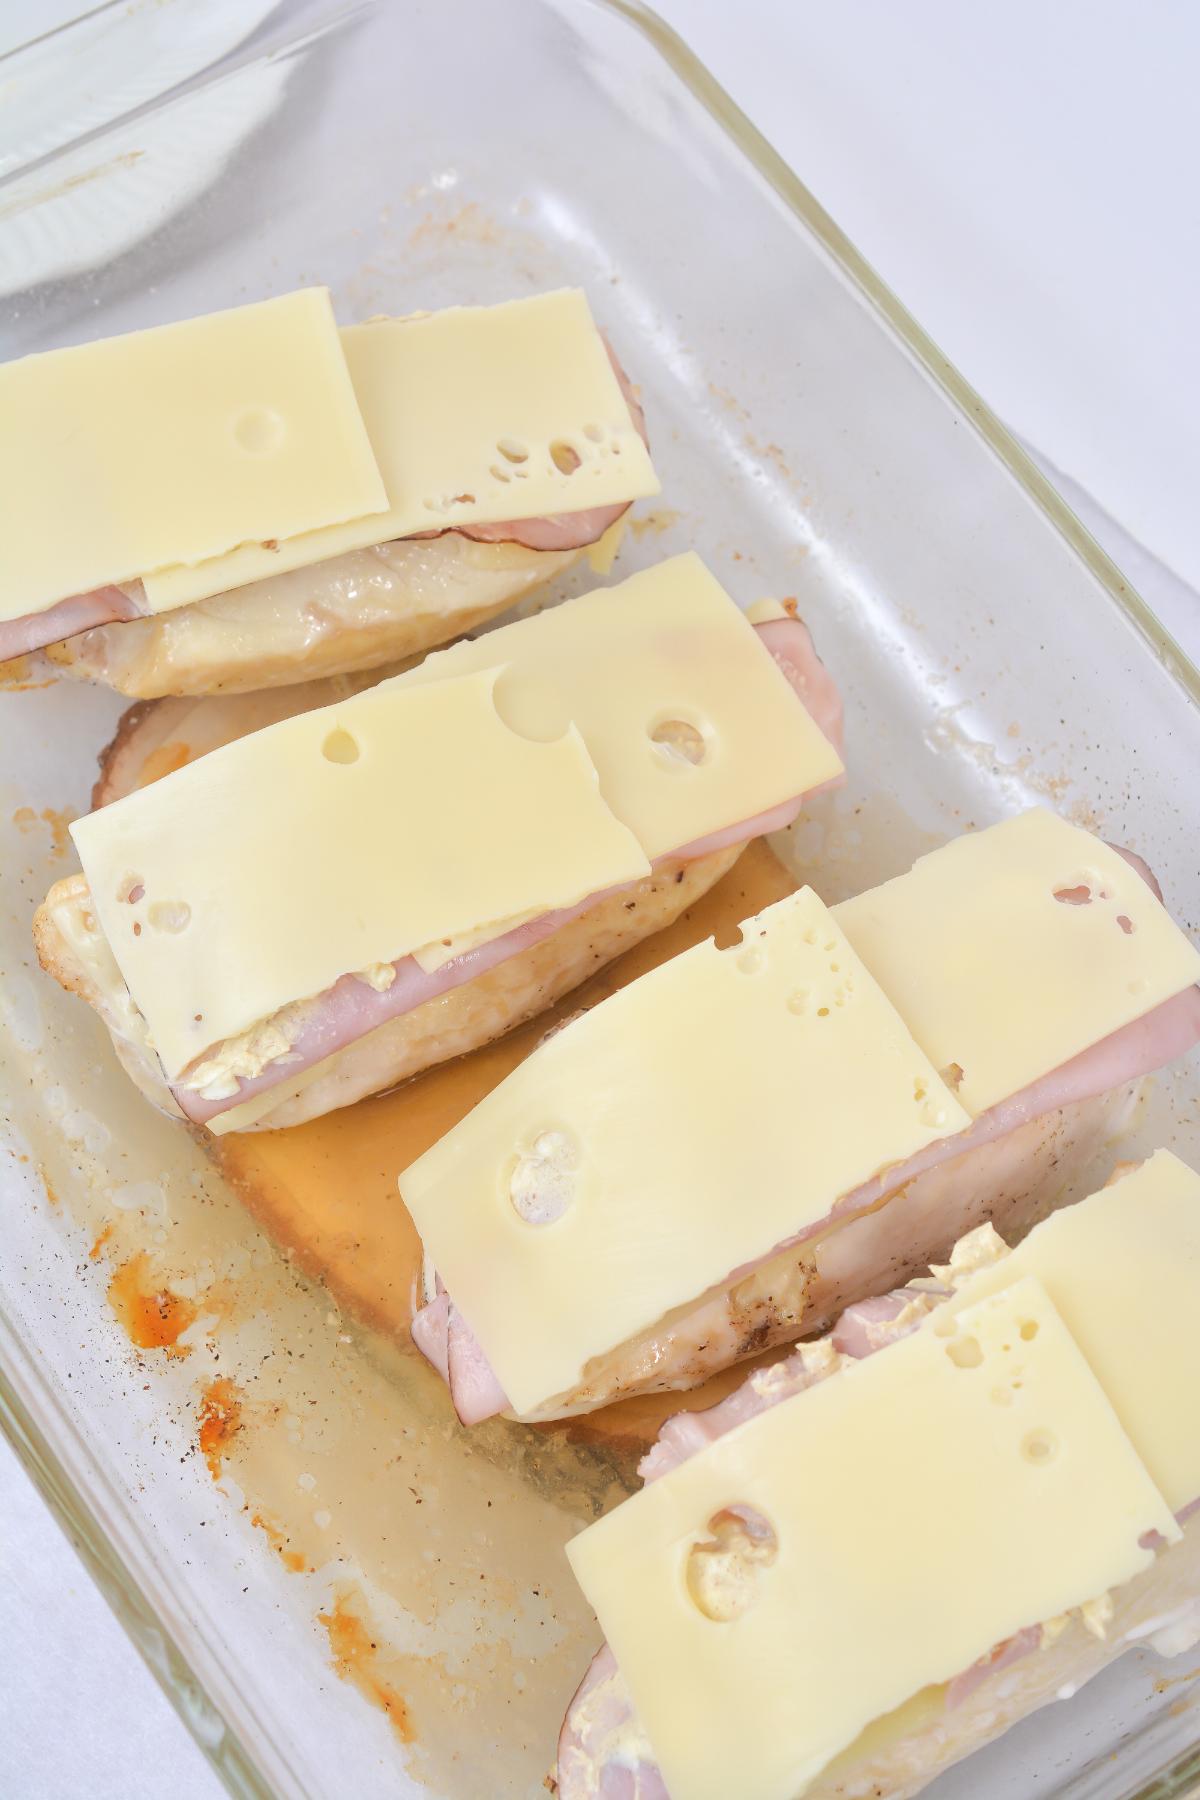 Slices of Swiss Cheese are added on top of the ham and chicken breast.